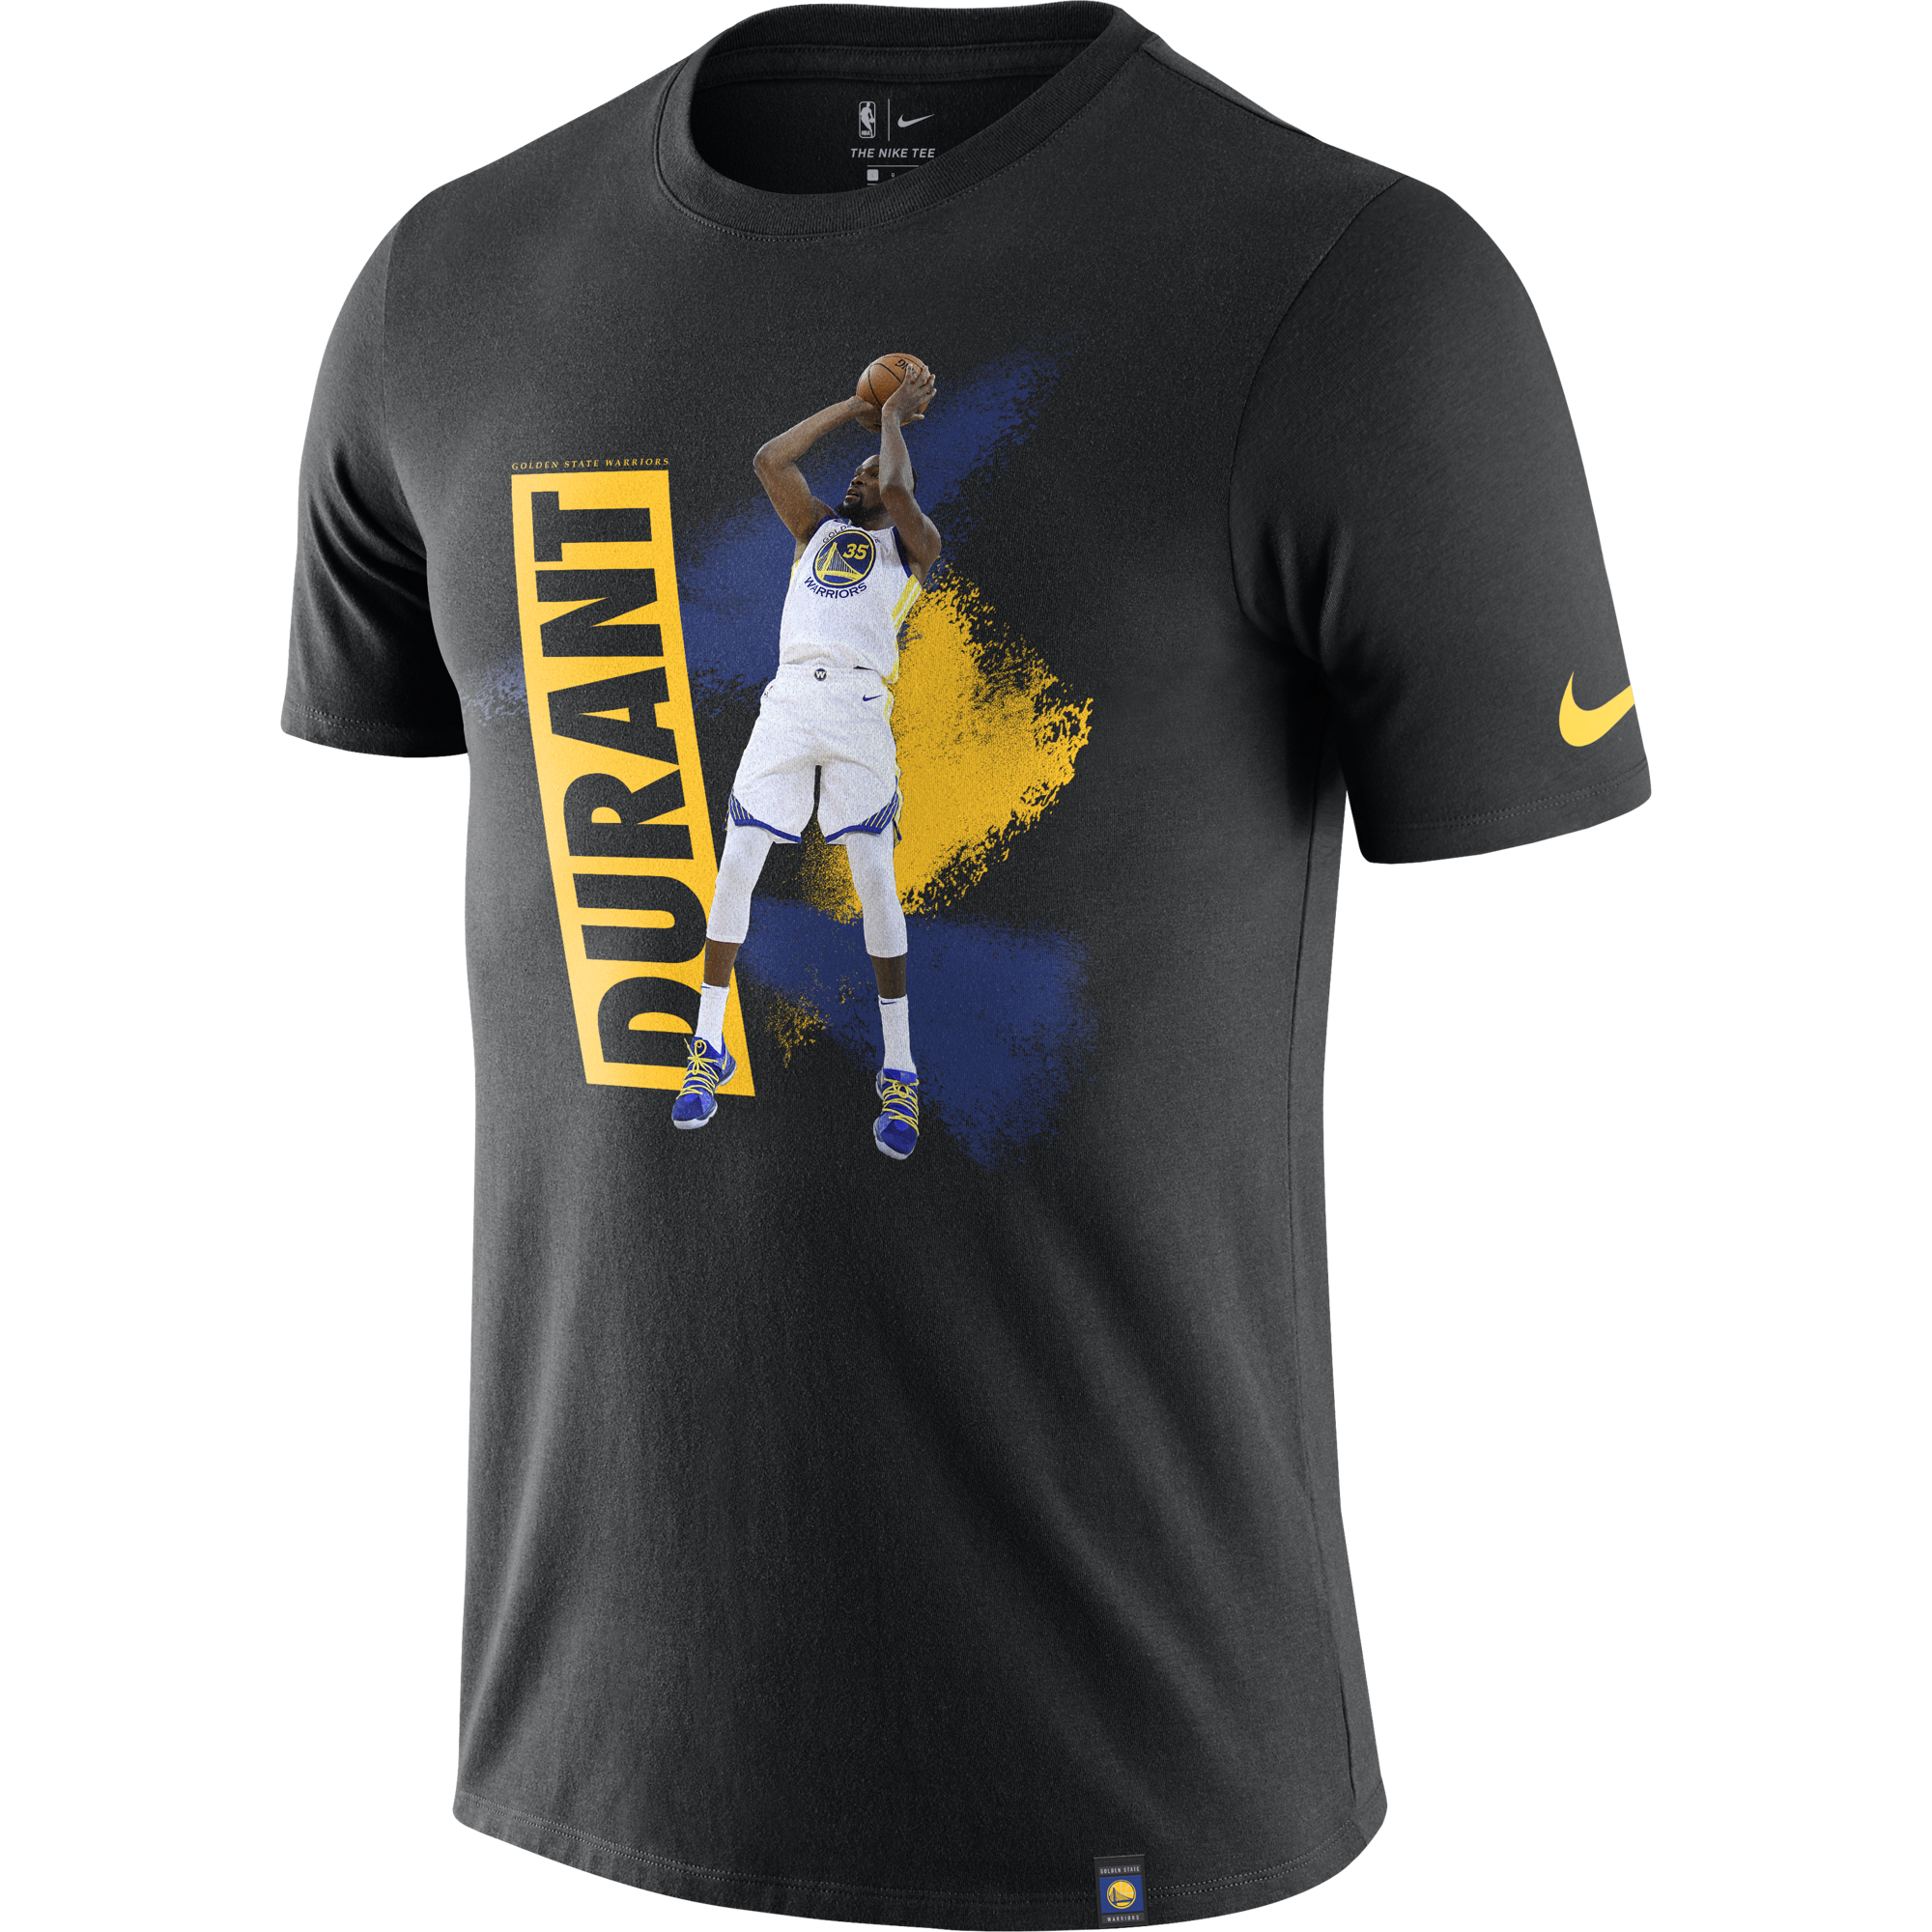 NIKE NBA GOLDEN STATE WARRIORS KEVIN DURANT DRY TEE for £30.00 ...